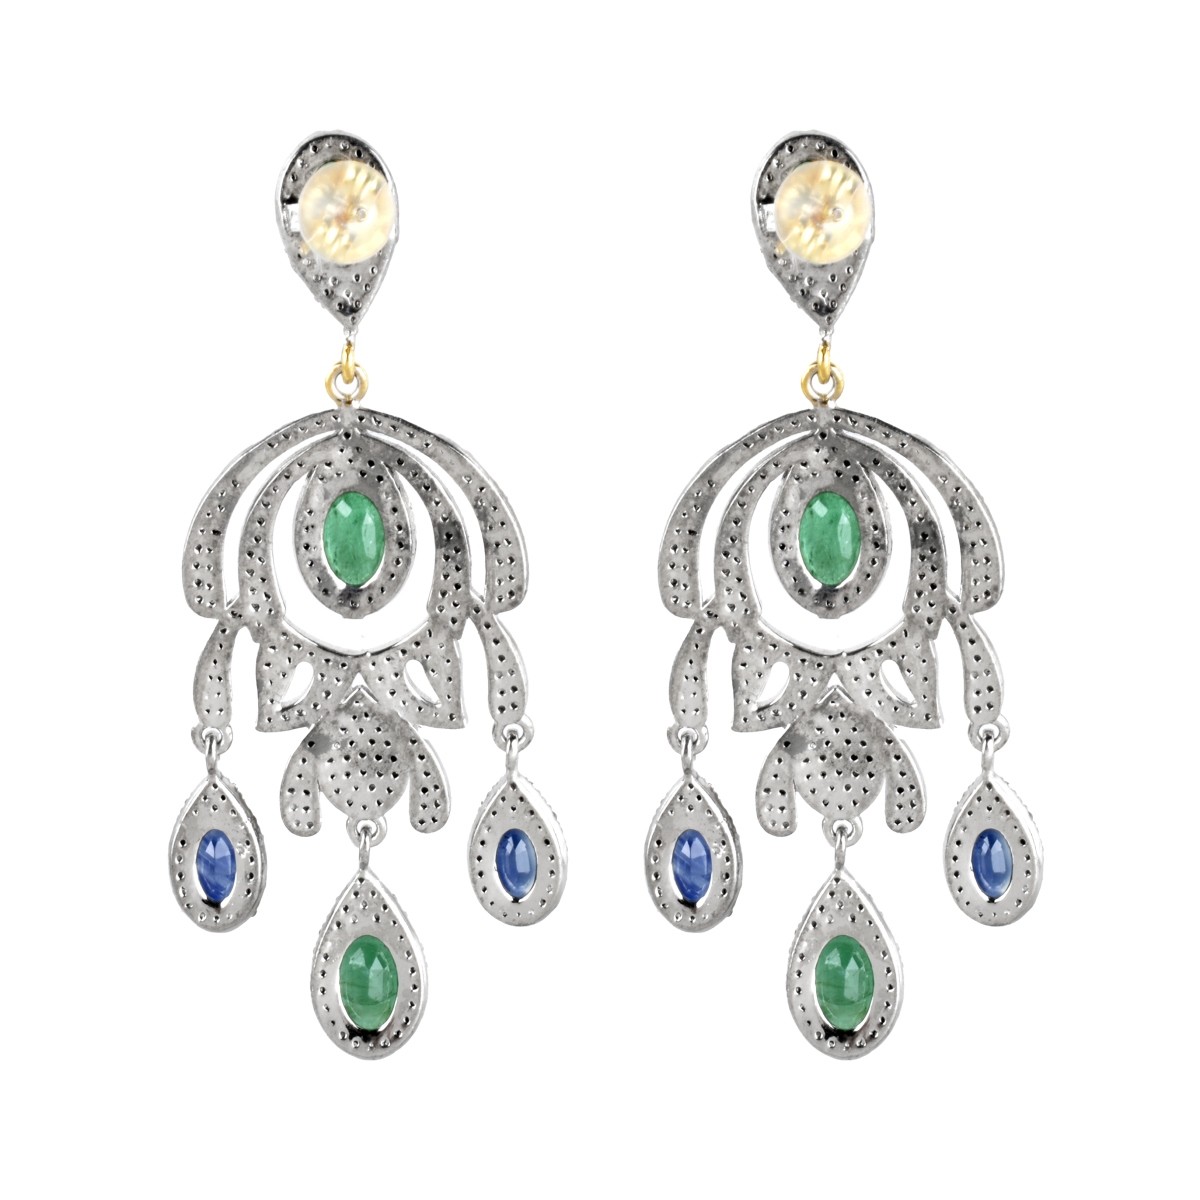 Emerald, Sapphire and Silver Earrings